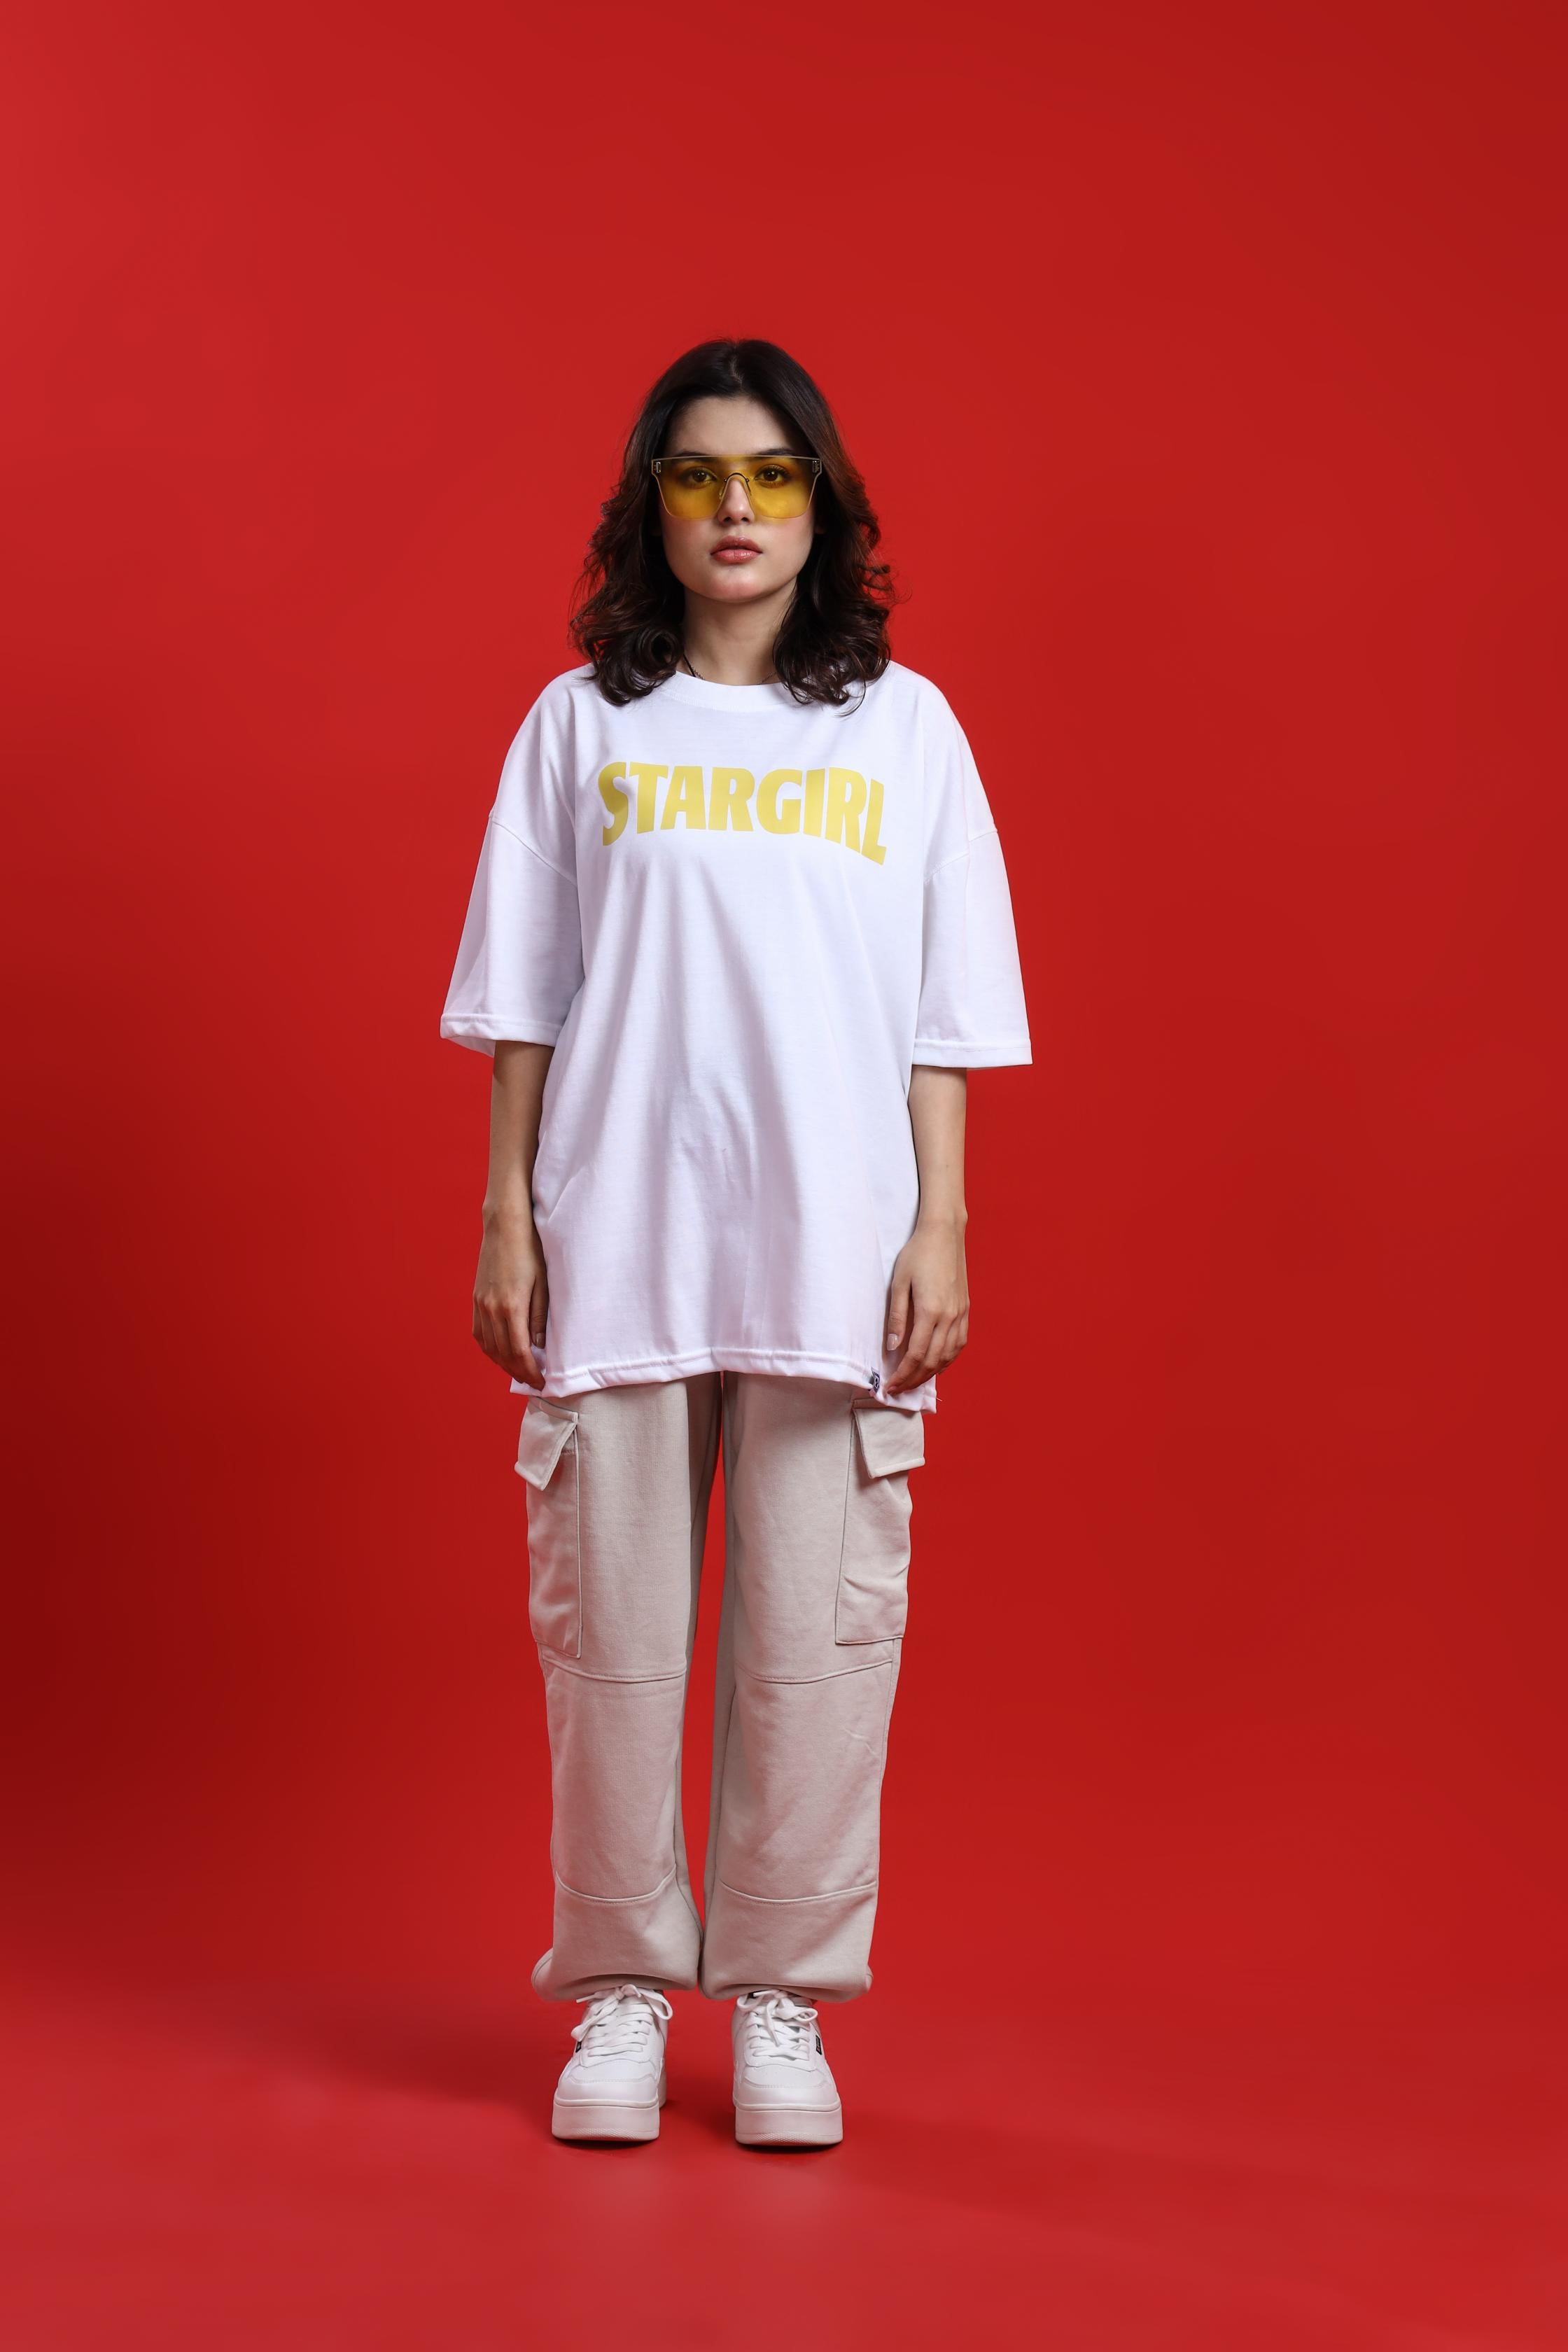 STAR GIRL: LANA DEL REY OVERSIZED T-SHIRT - Shop Now - Checkmate Atelier